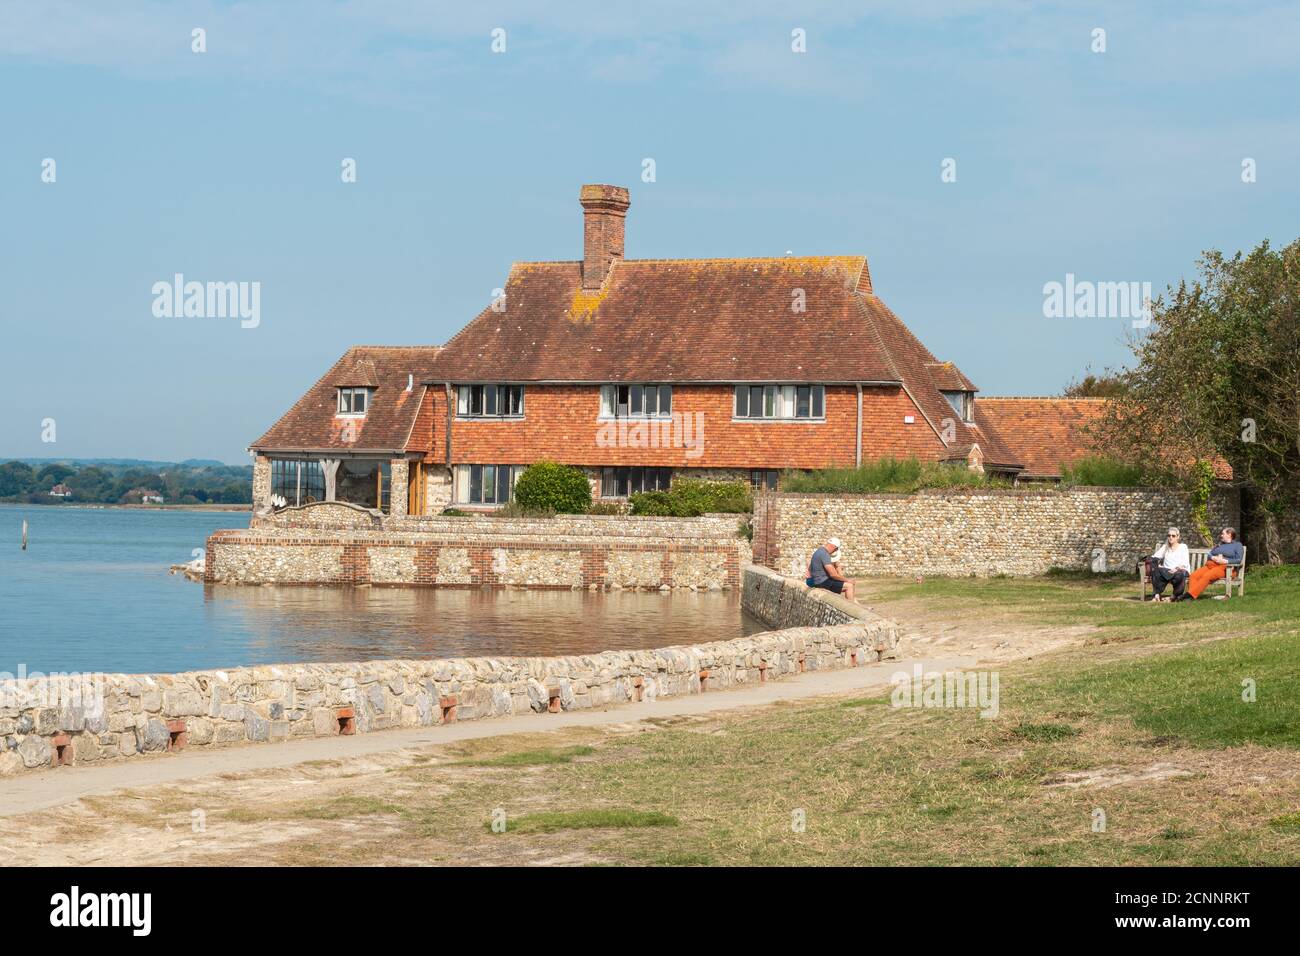 Visitors sitting relaxing on the lawn overlooking Bosham Quay, a picturesque seaside village in West Sussex, UK Stock Photo